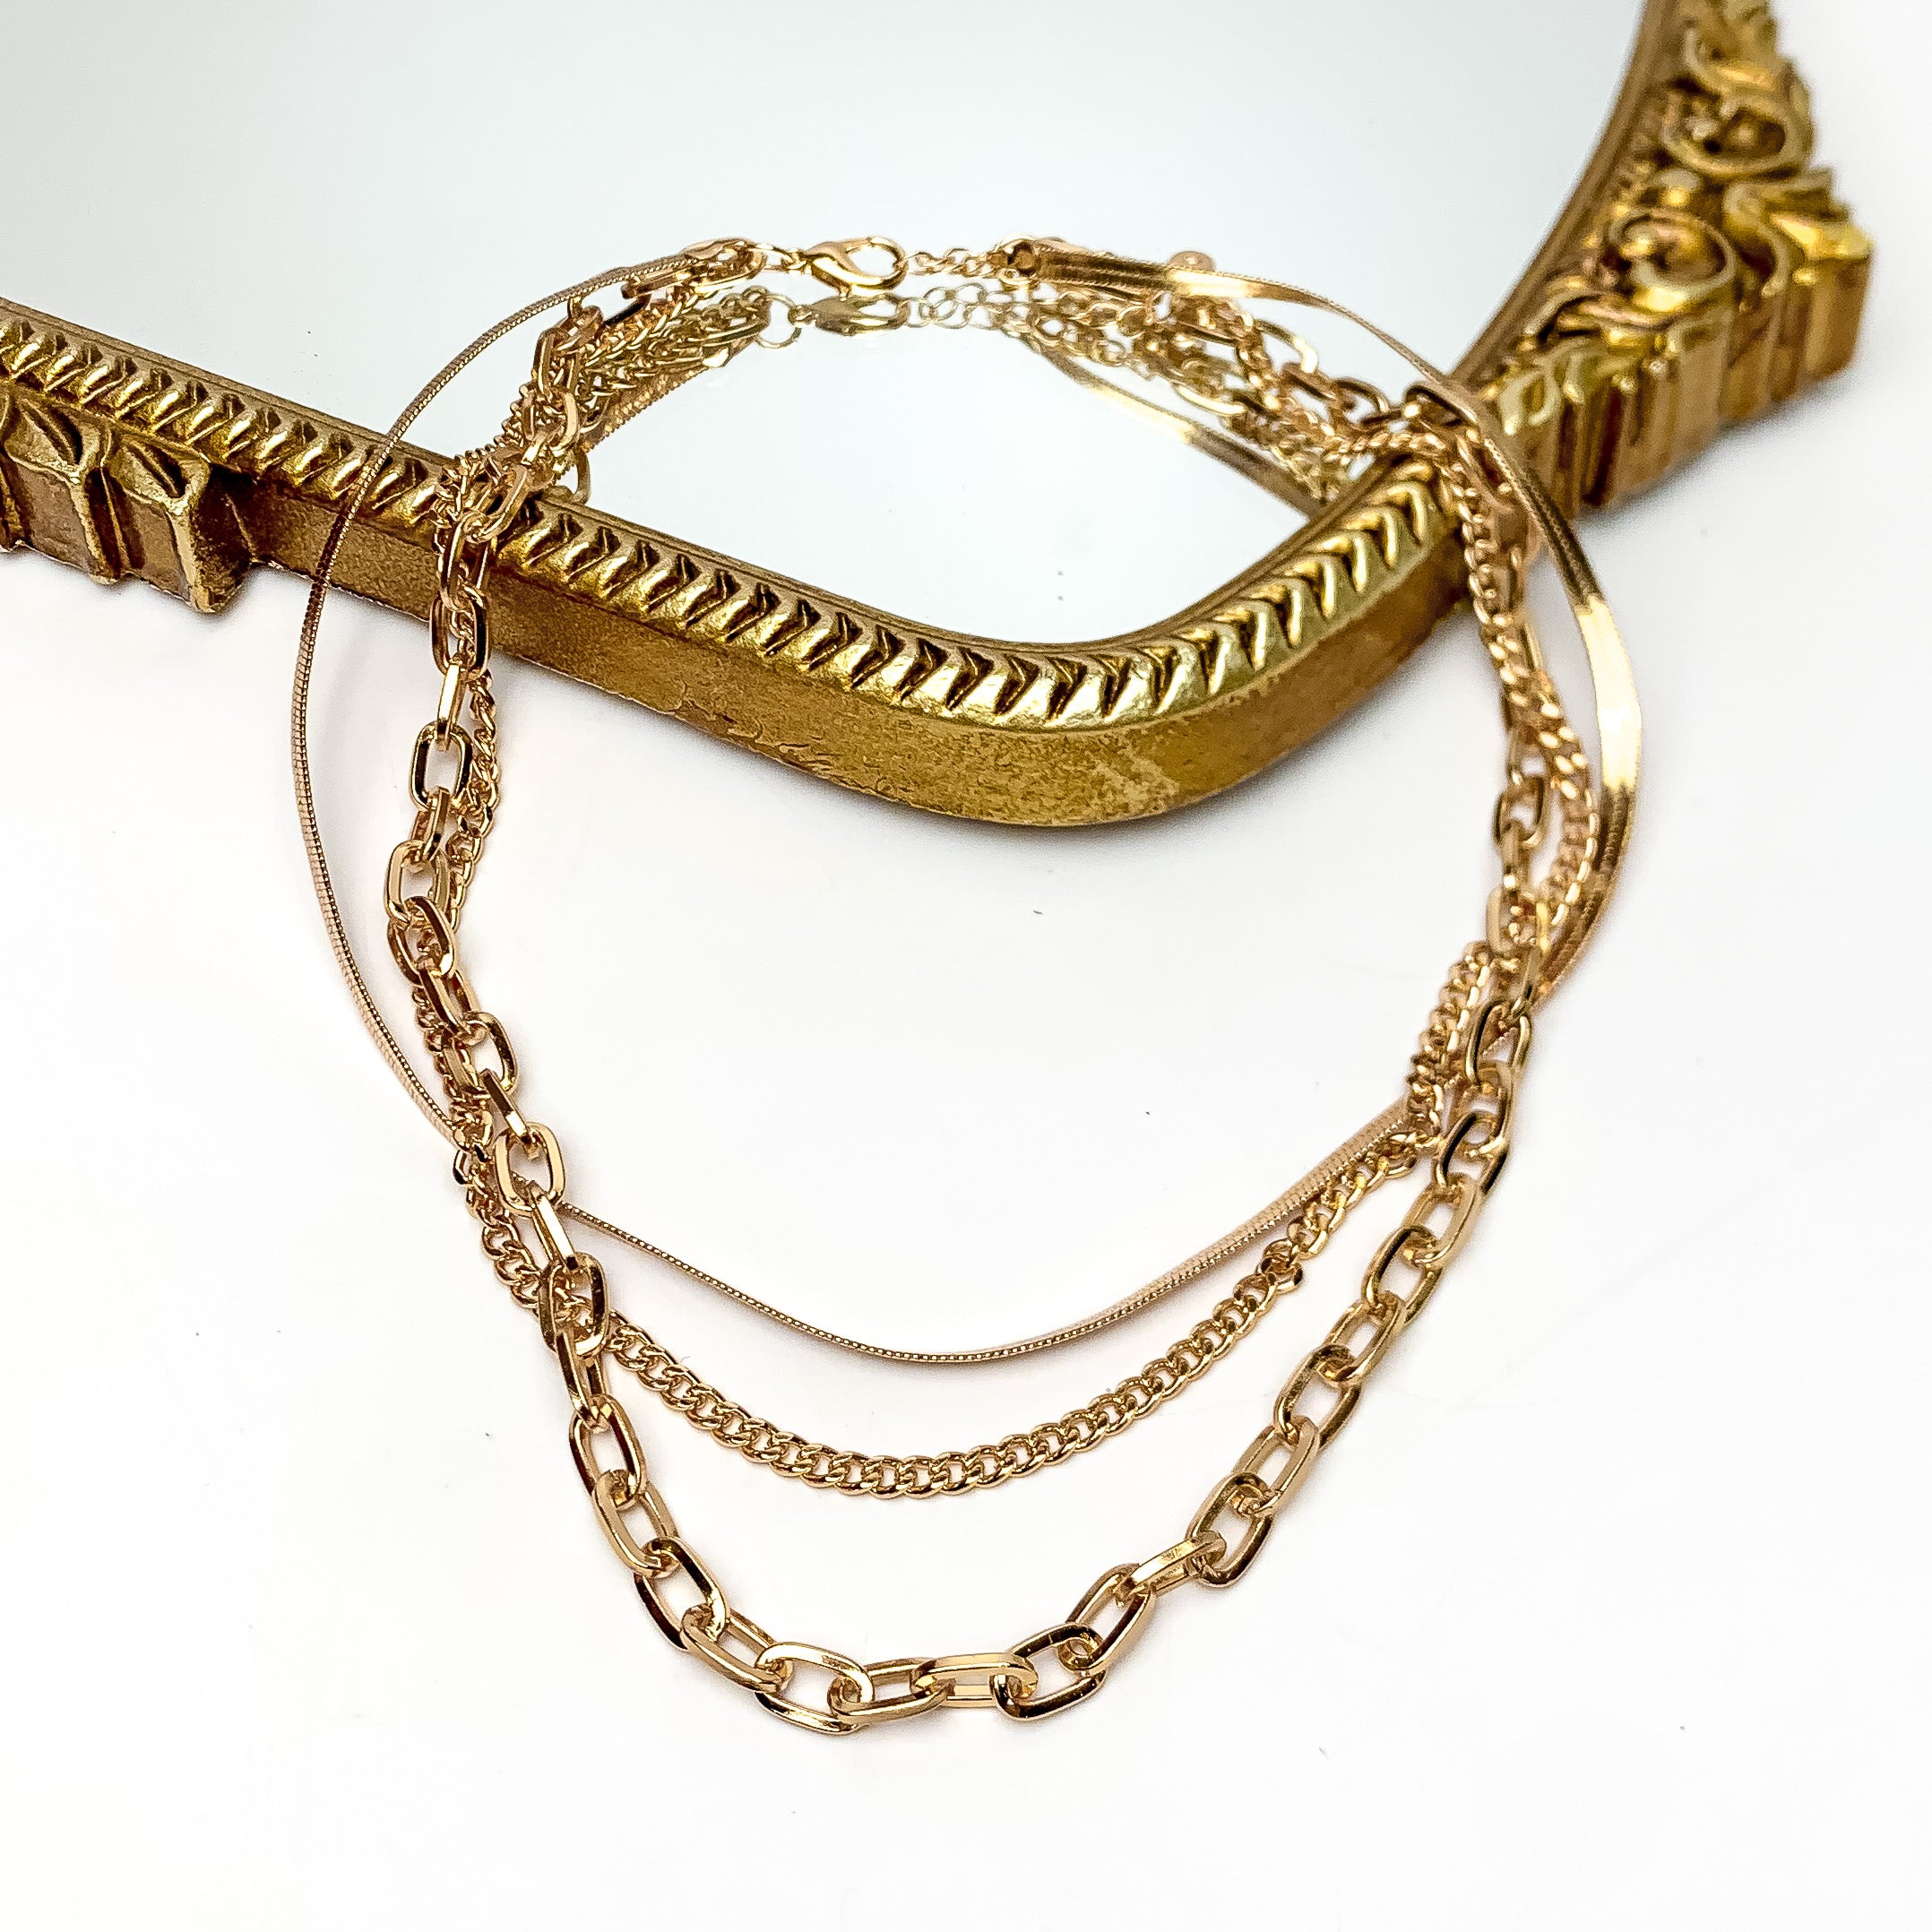 Friday Night Fun Multi Strand Chain Necklace in Gold Tone. This gold tone necklace is on a white background with part of it on a gold trimmed mirror.